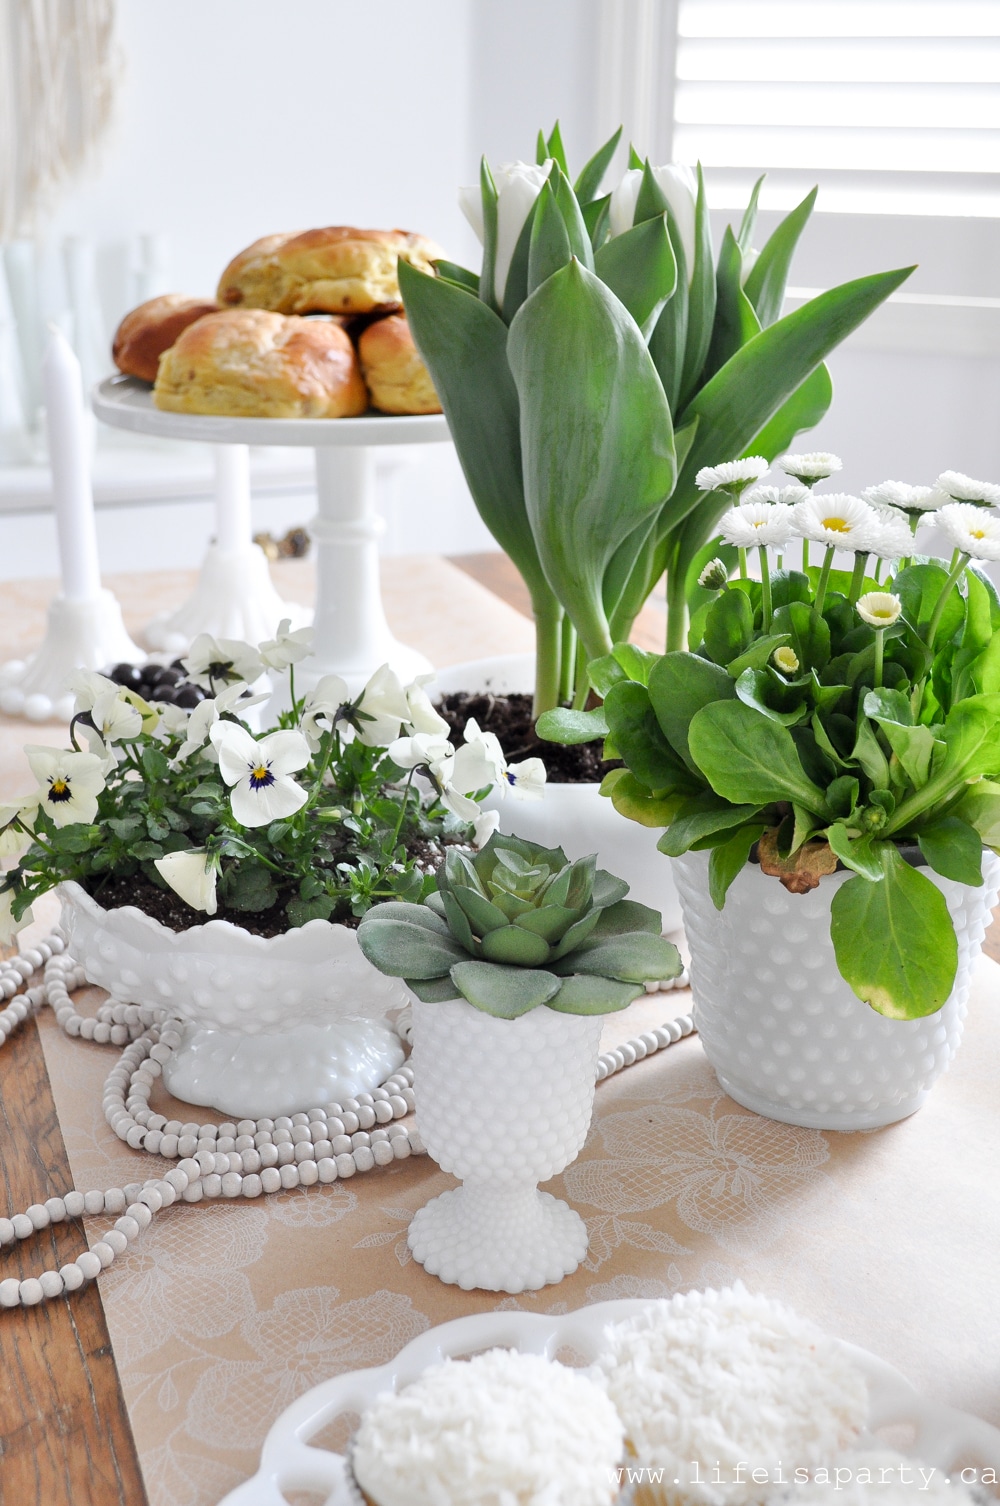 use vintage Milk Glass Collection for planting spring flowers and bulbs